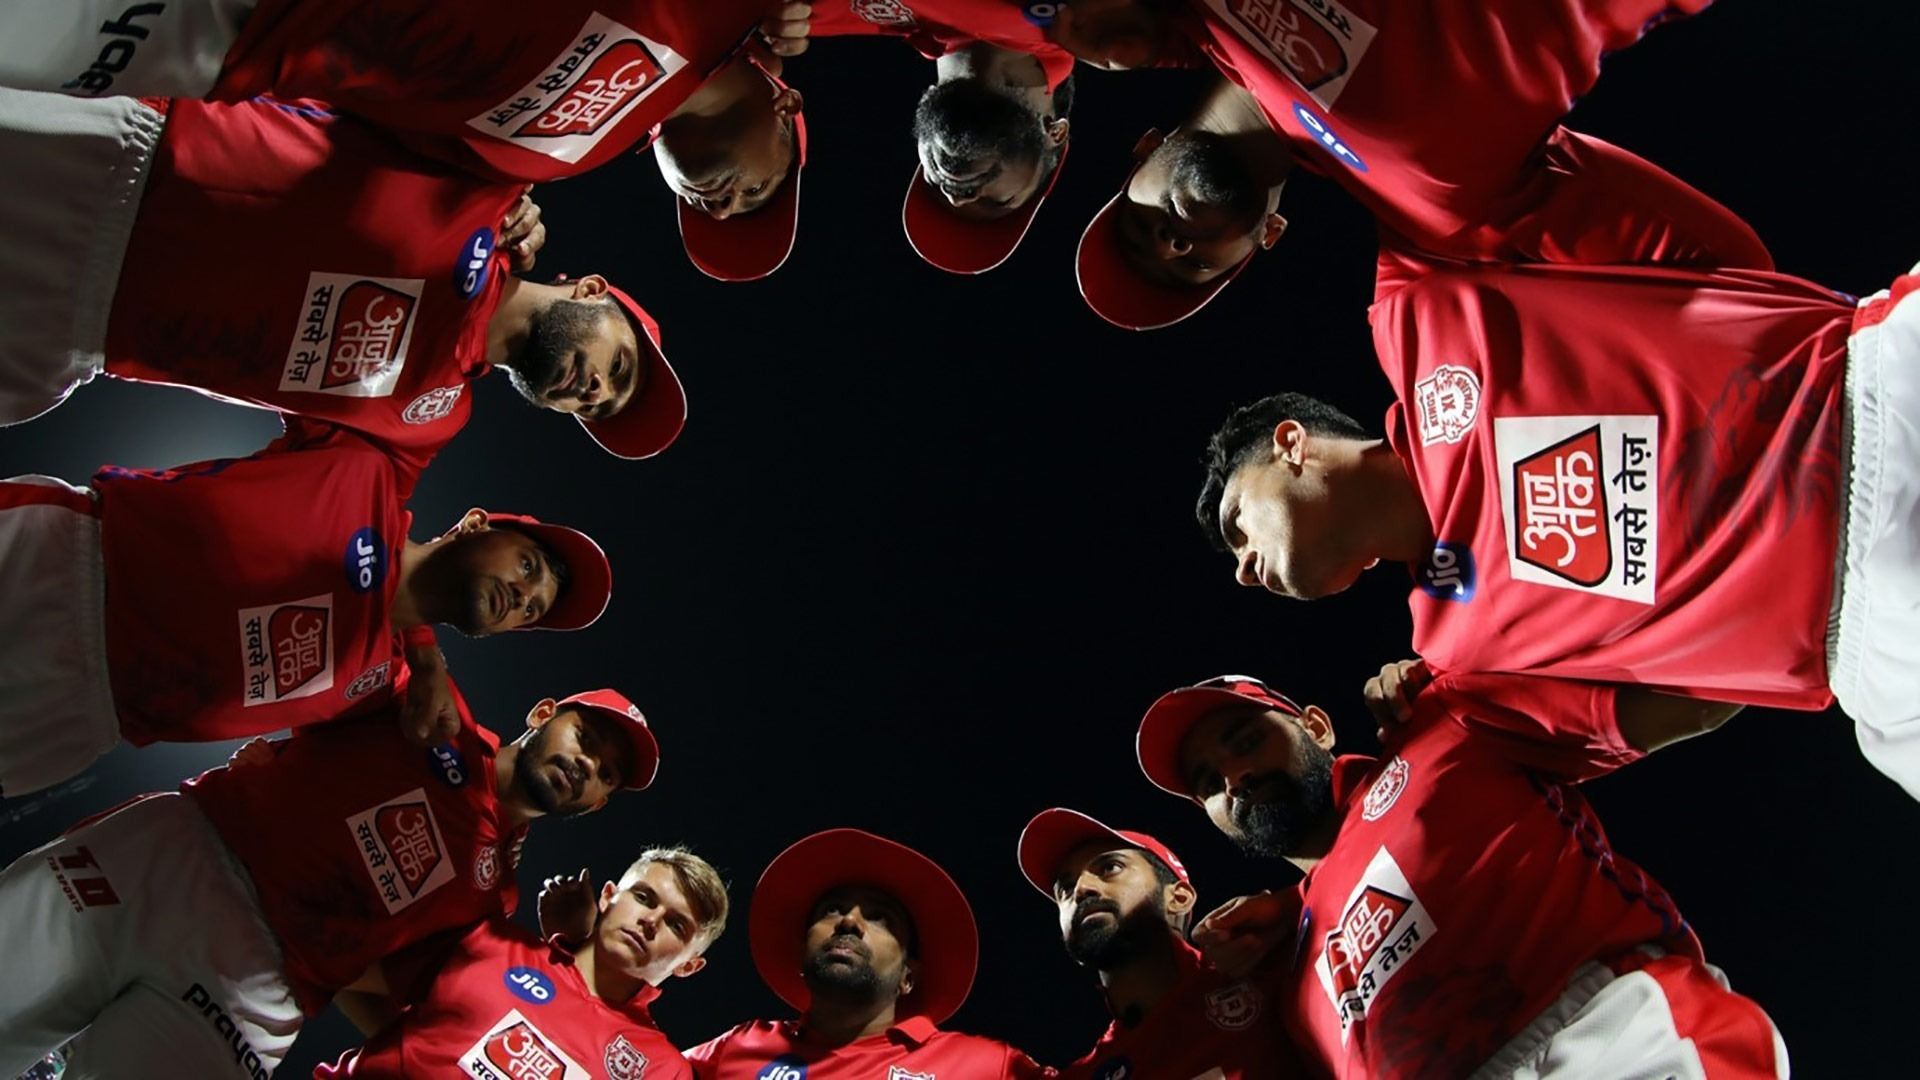 Kings XI Punjab retains 14 players for 2020 IPL. KXIP. Official Website of the Kings XI Punjab